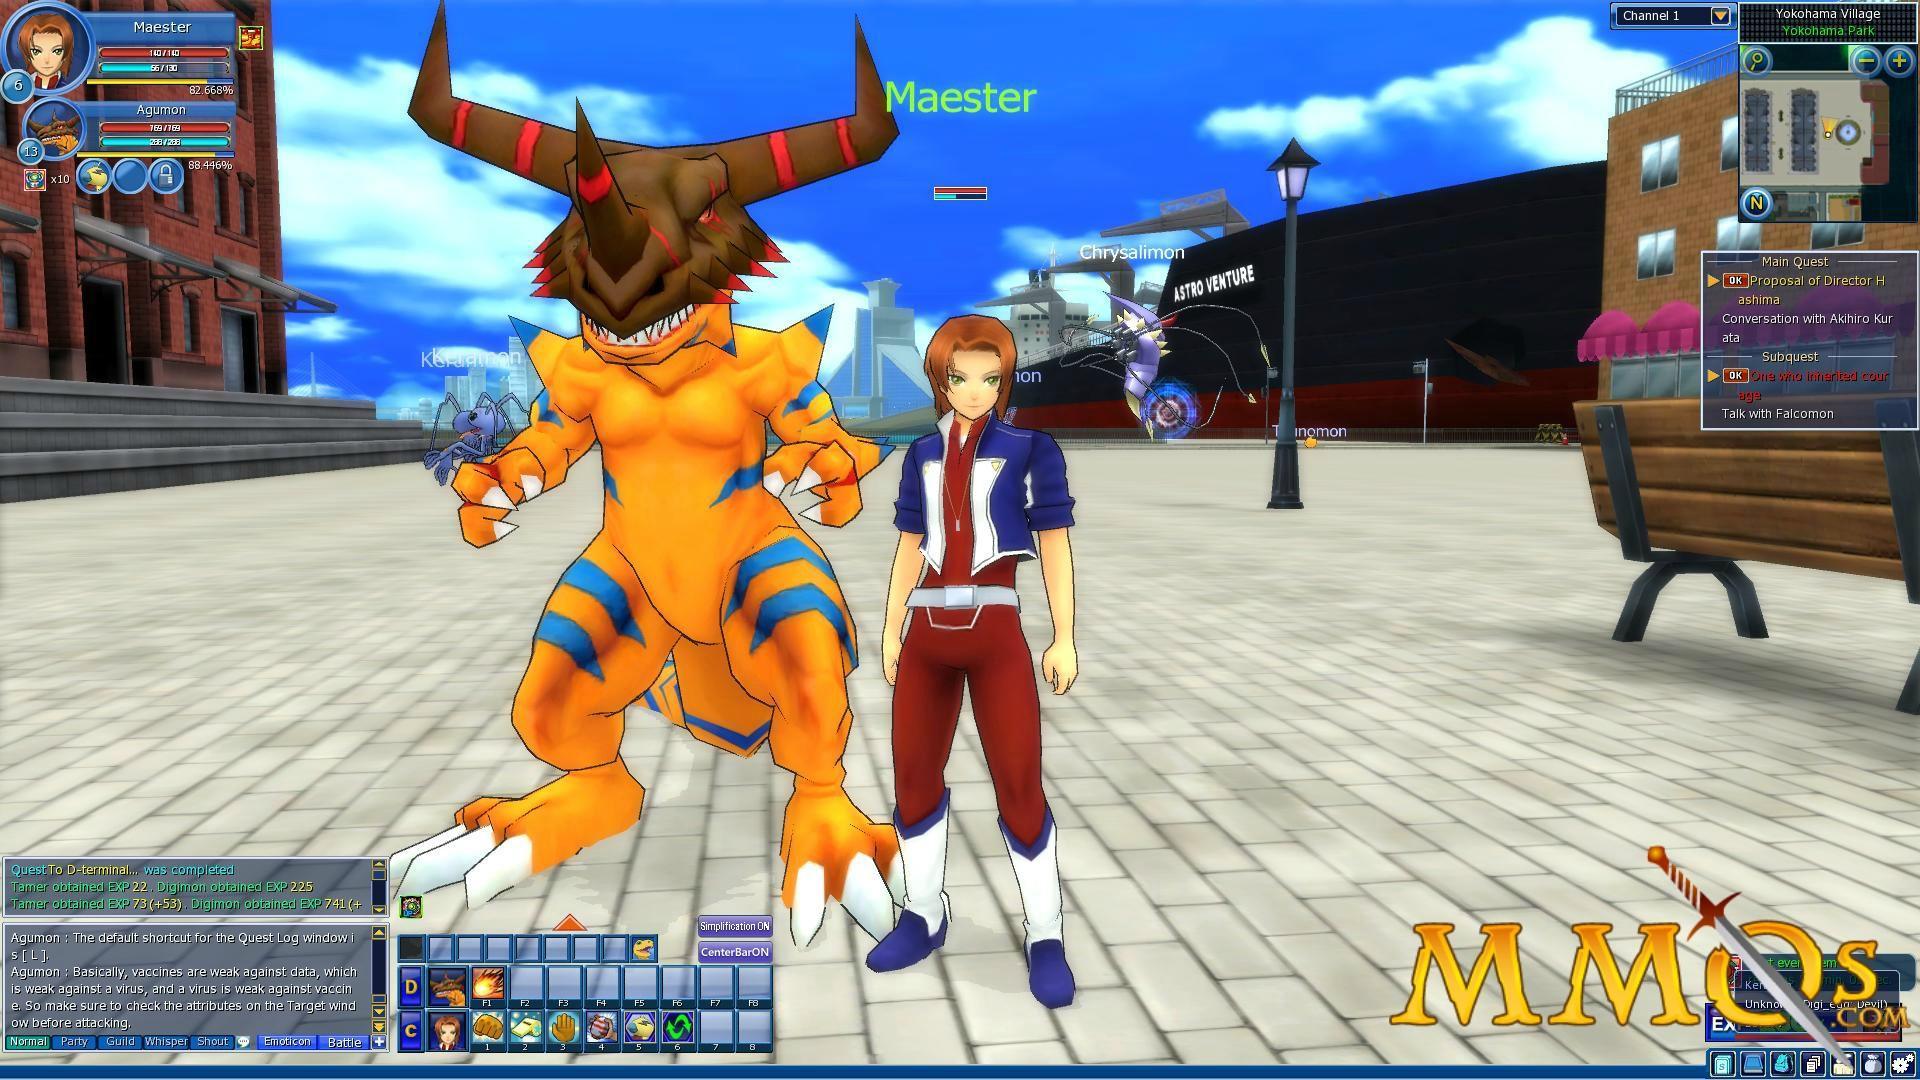 Bring your best friend to play DMO with you! - Digimon Masters